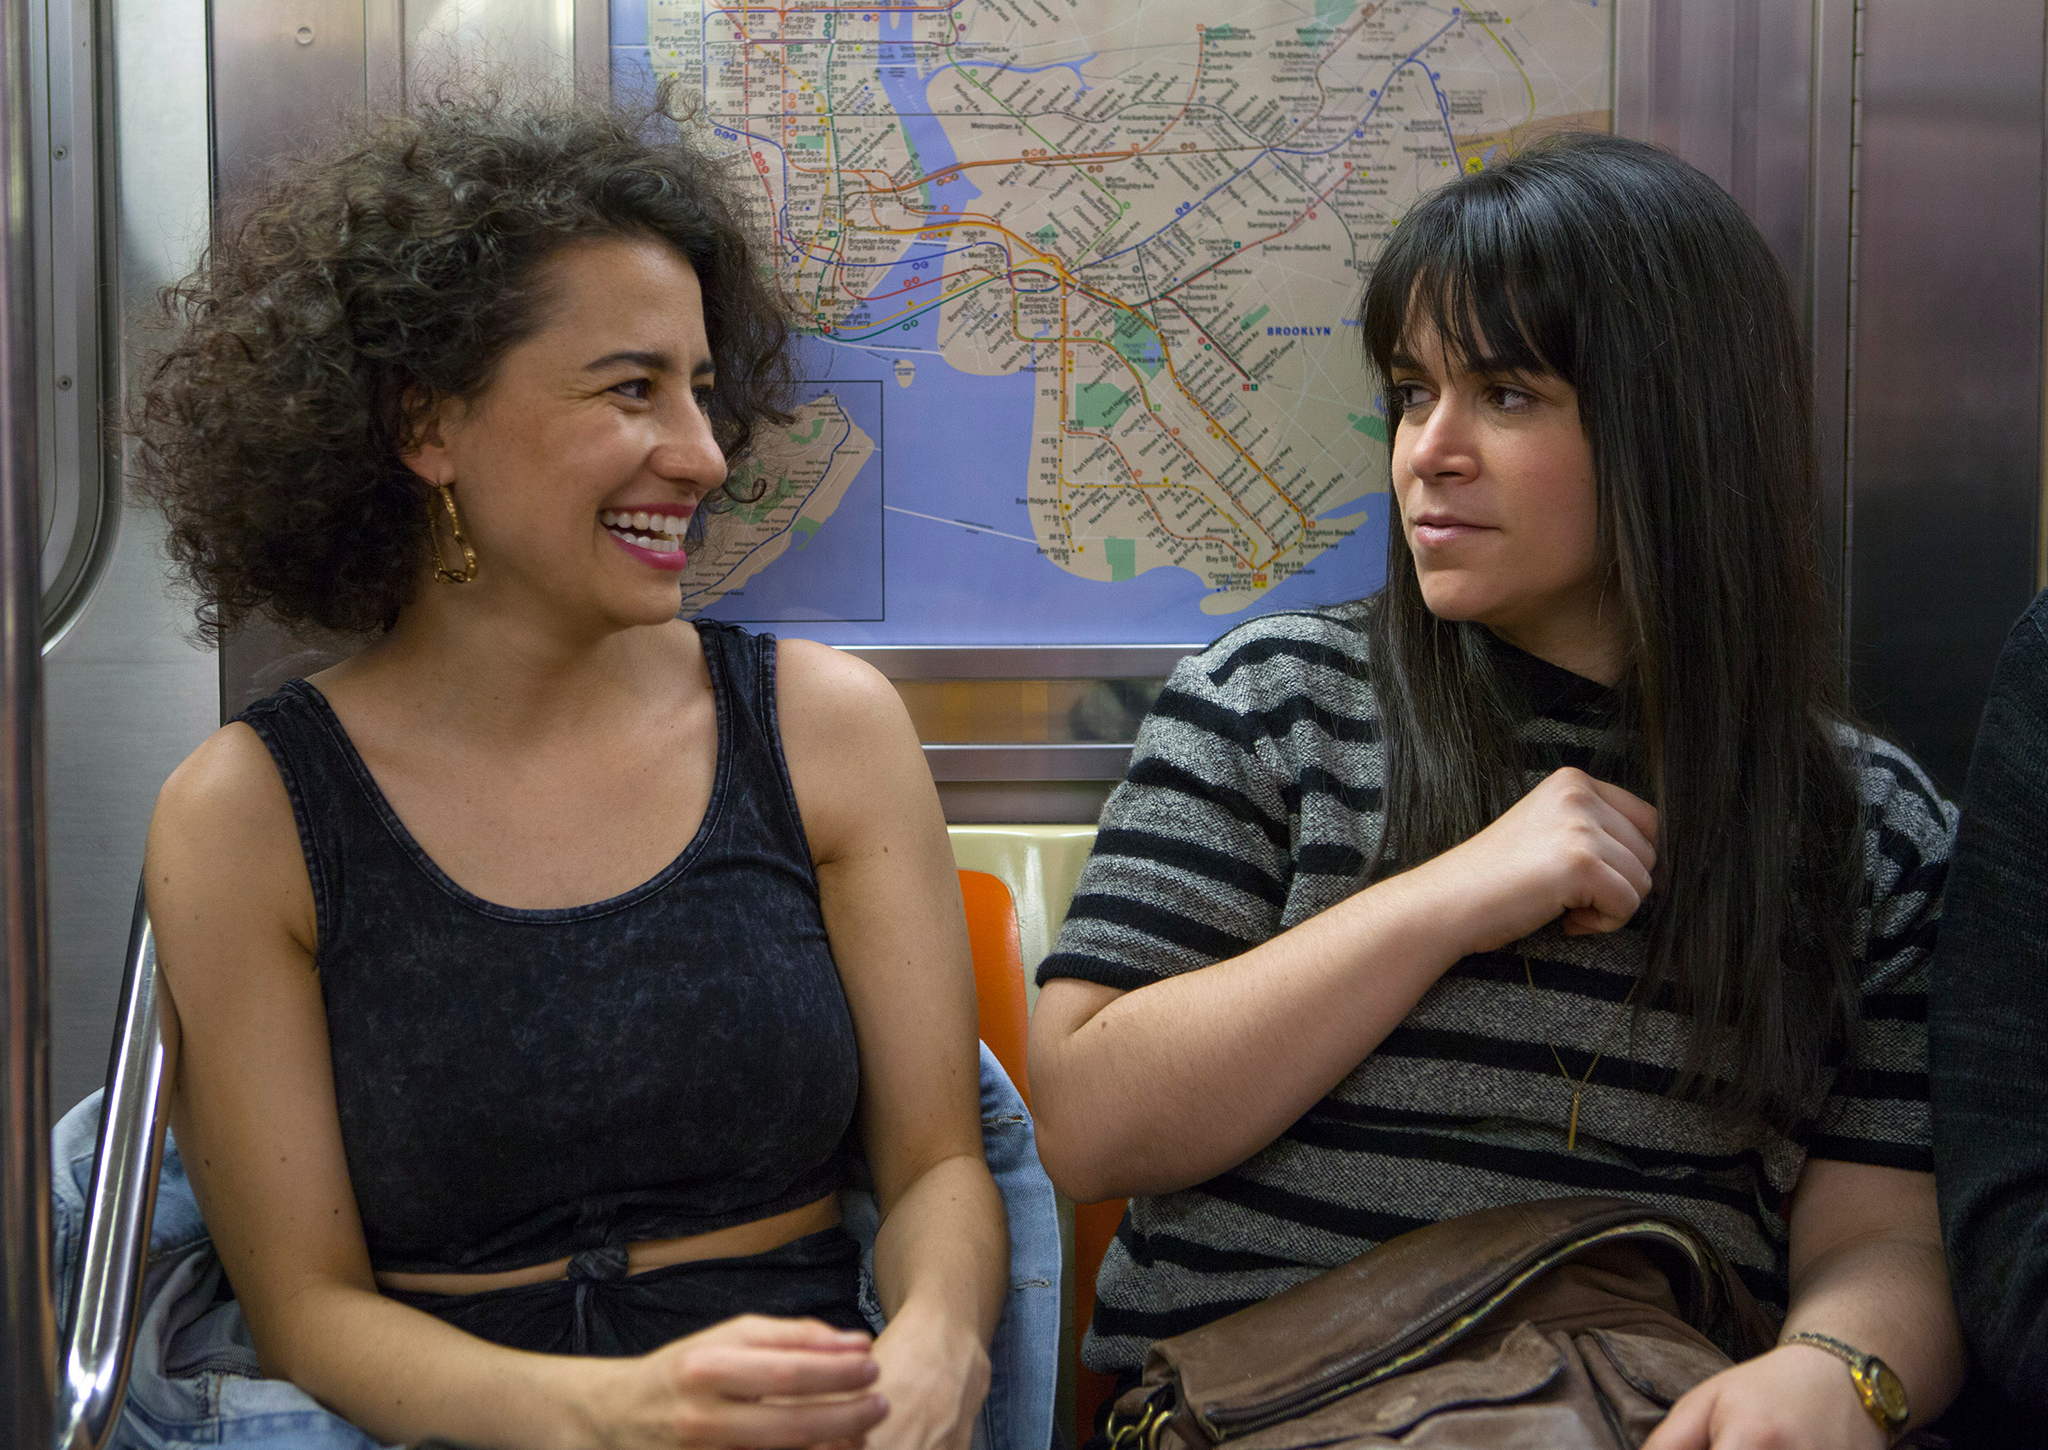 Ilana Glazer and Abbi Jacobson, stars of Broad City, who appeared at the event and will have their show streamed on the platform